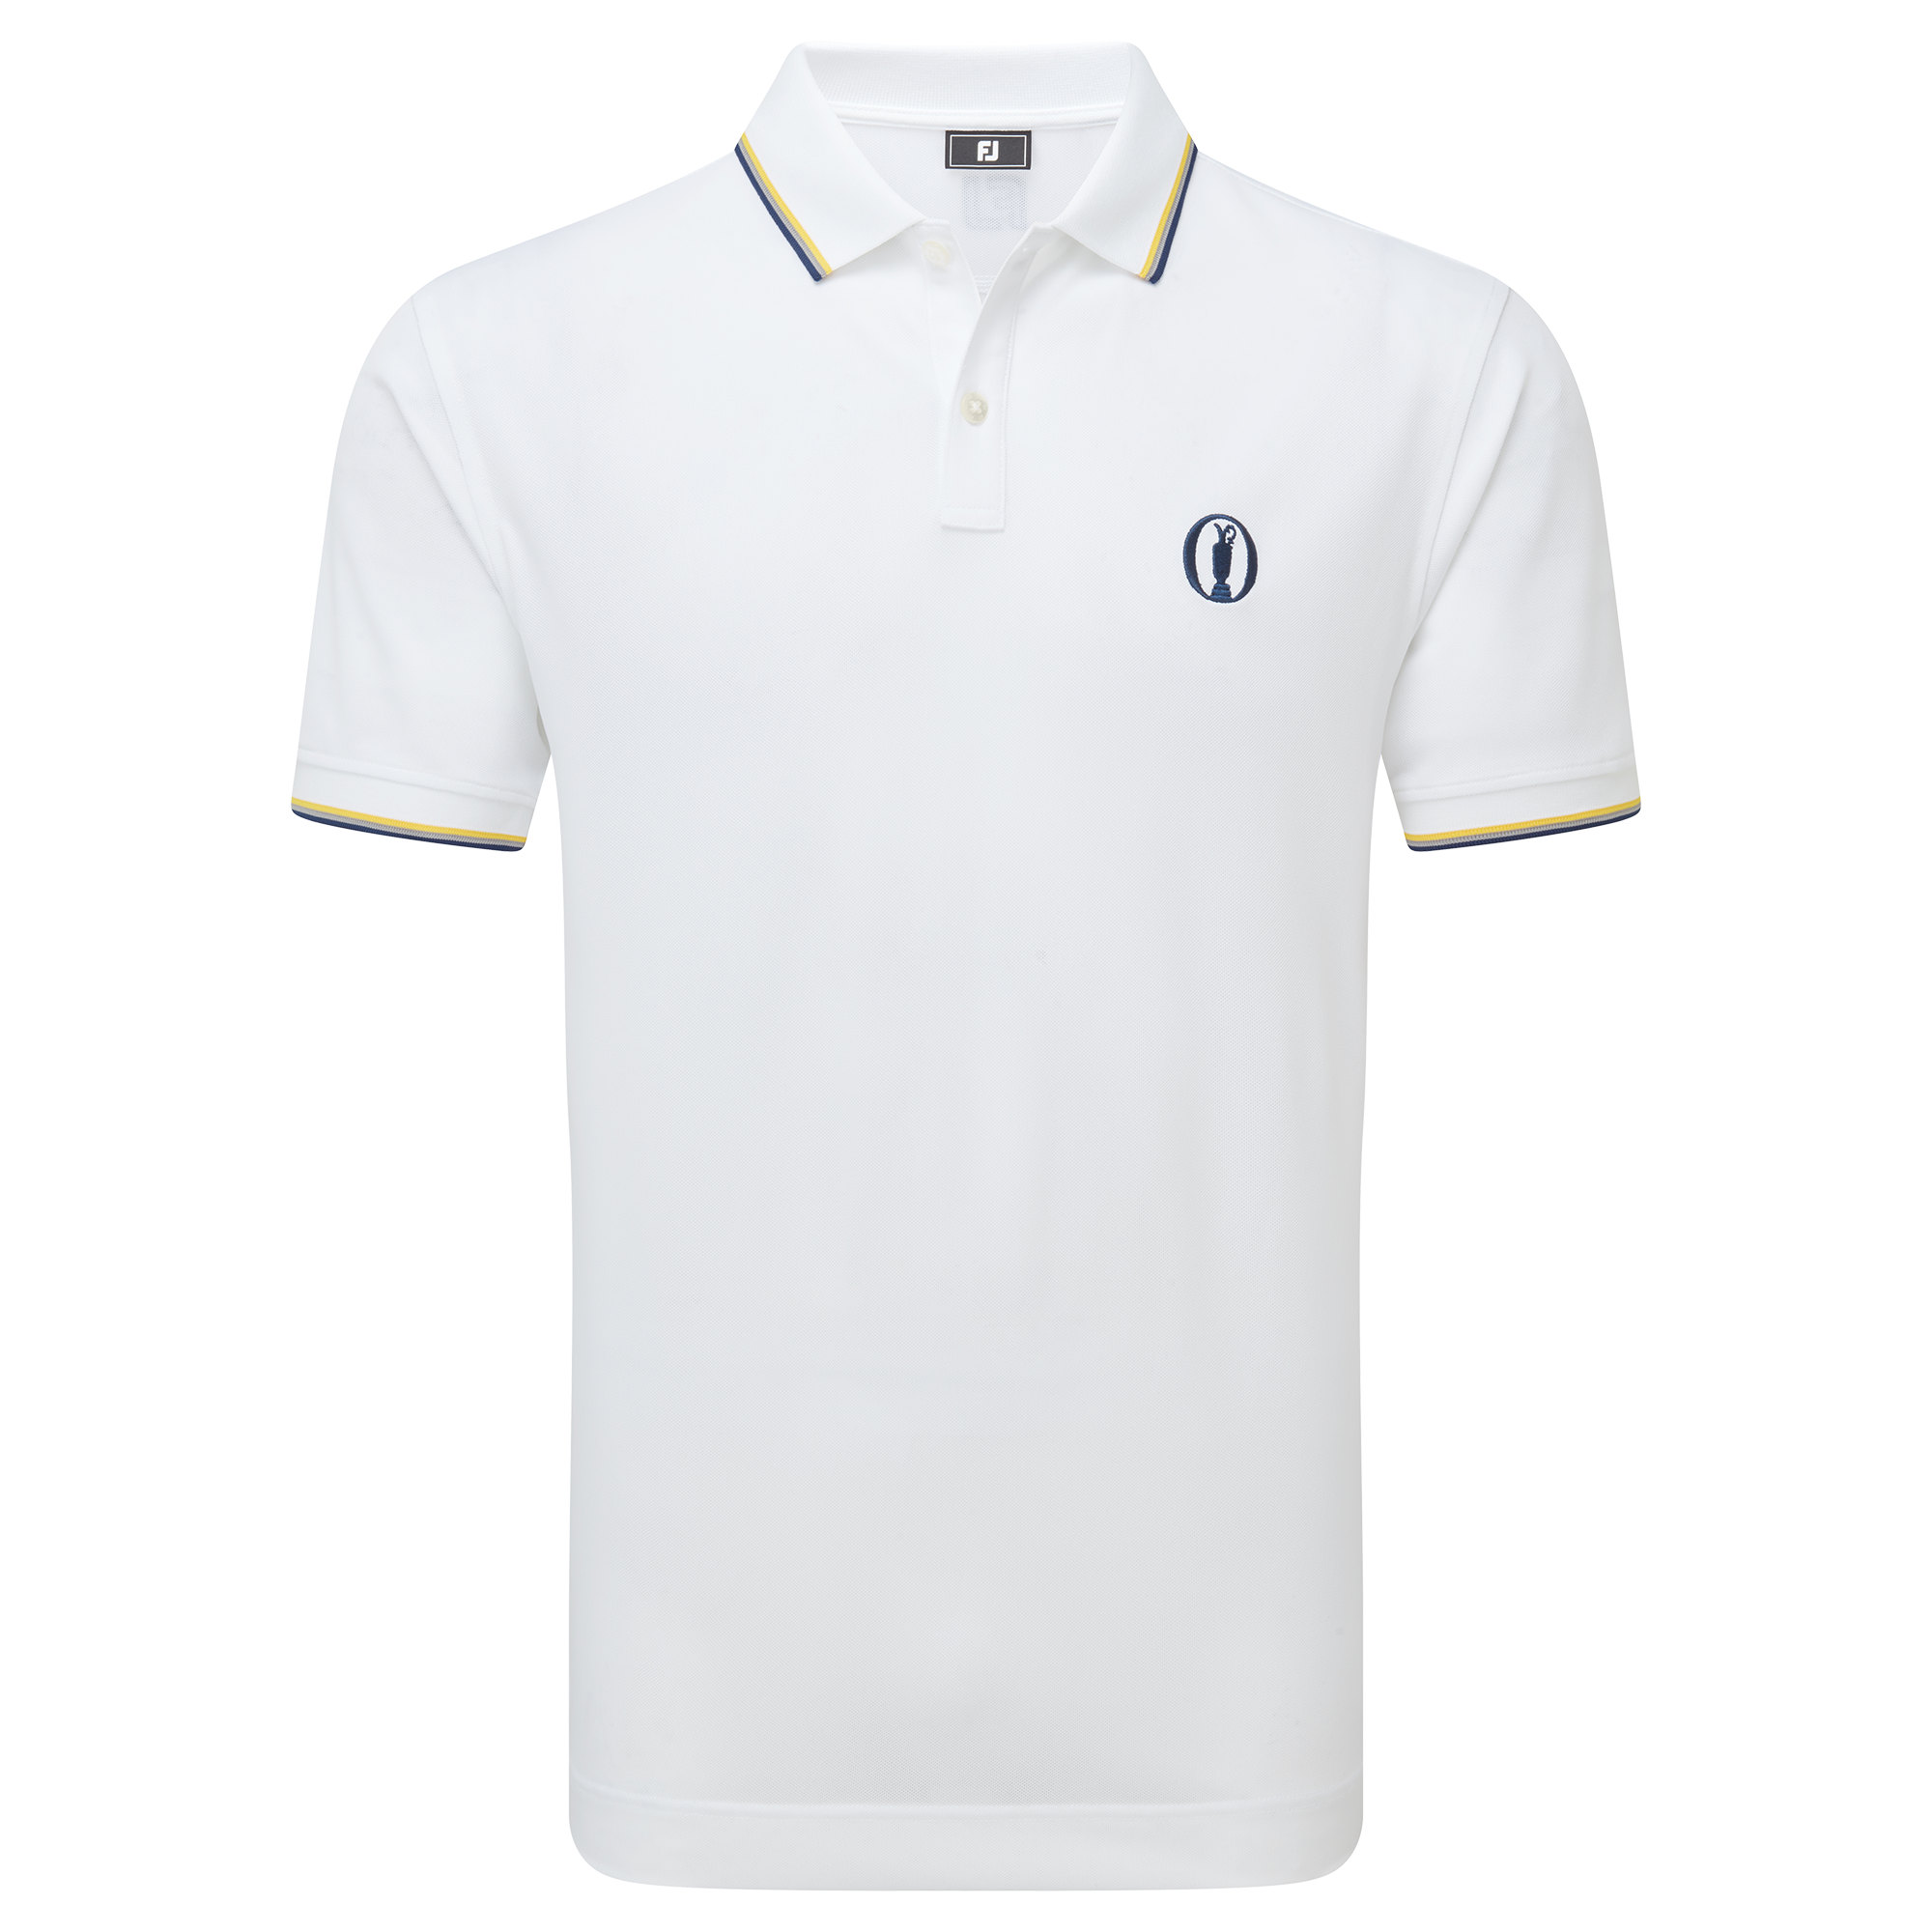 152nd Open Championship Solid with Trim Pique Shirt